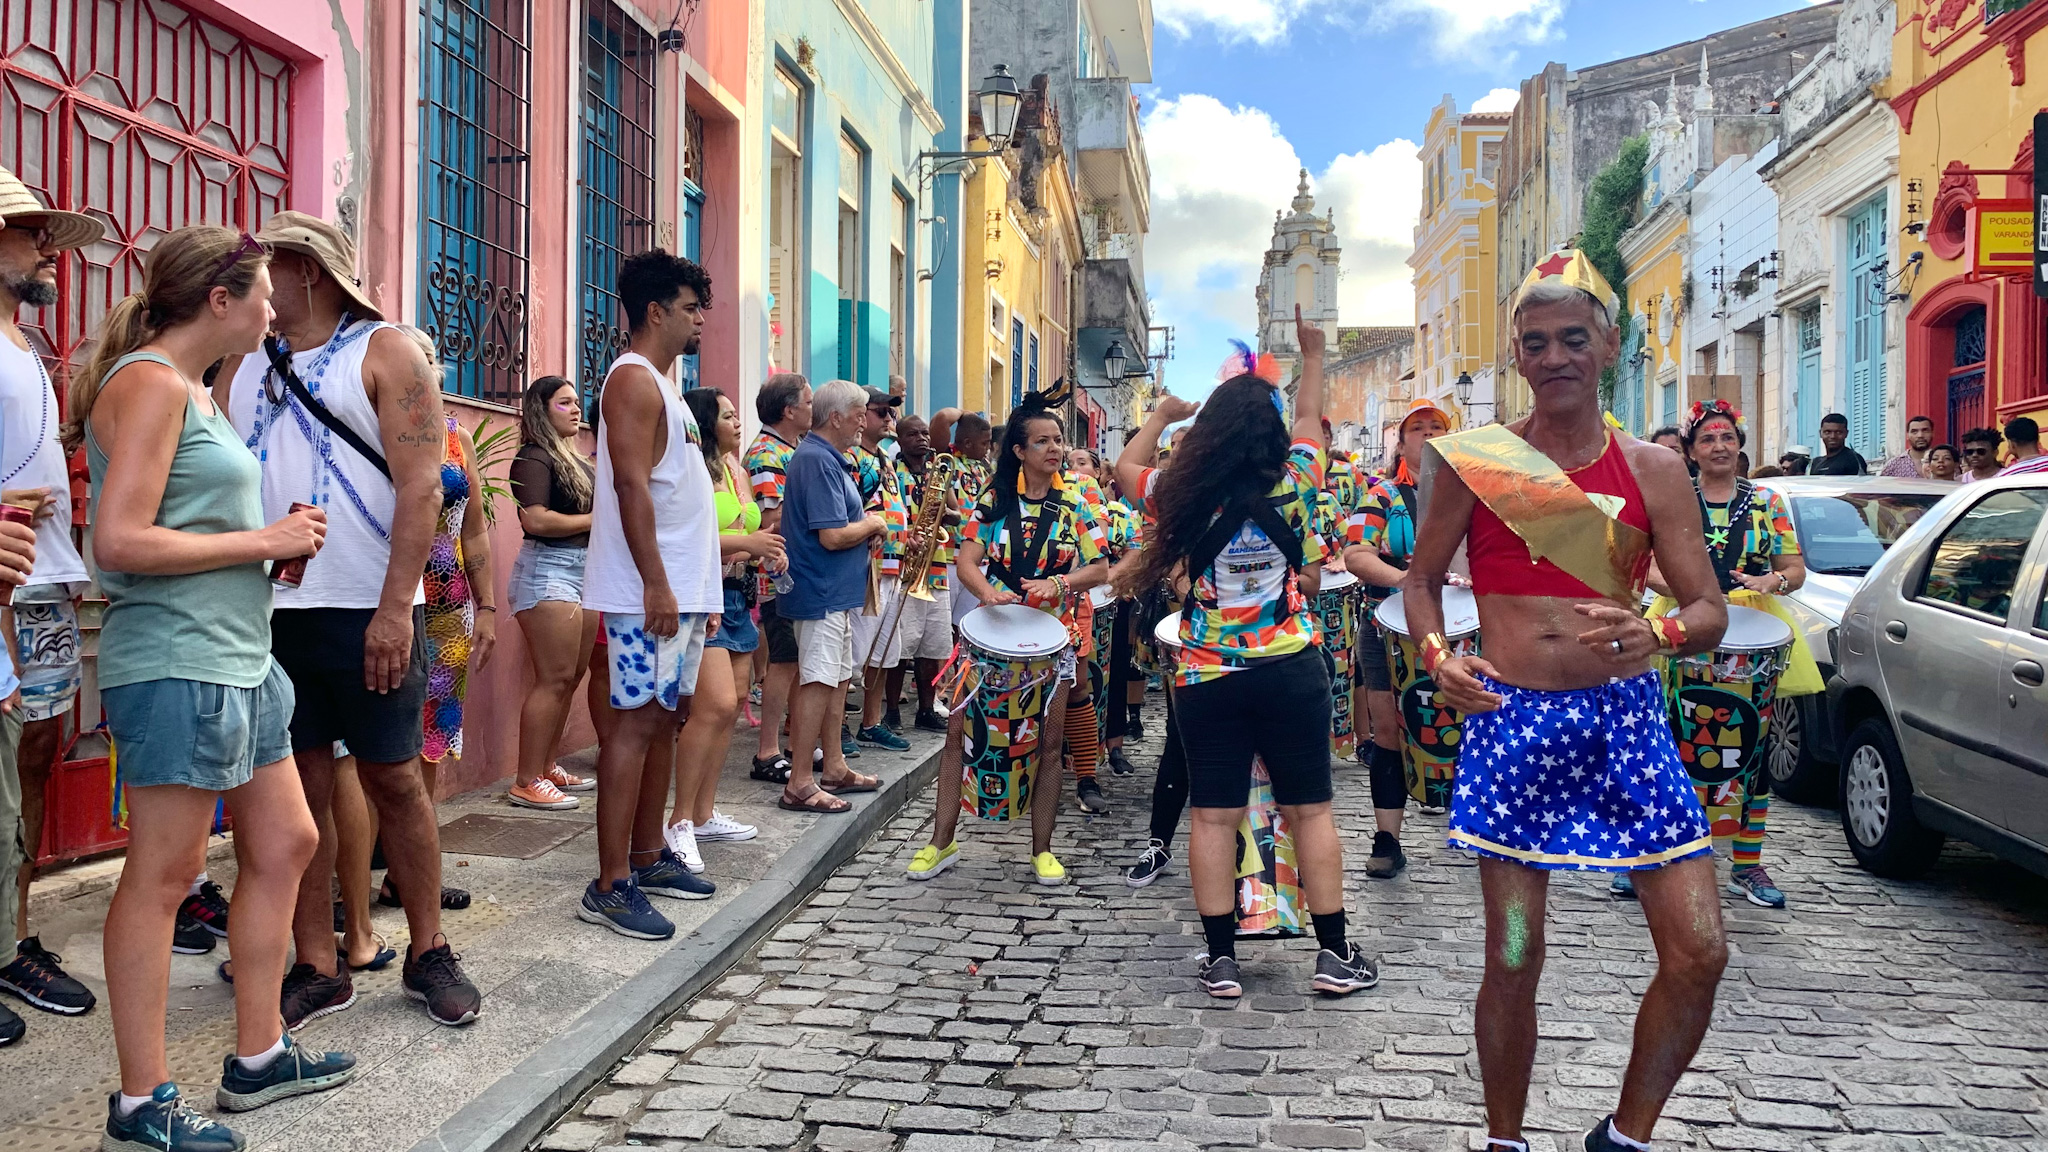 Carnival in Salvador – Saying Farewell to Brazil With The World’s Biggest Street Party